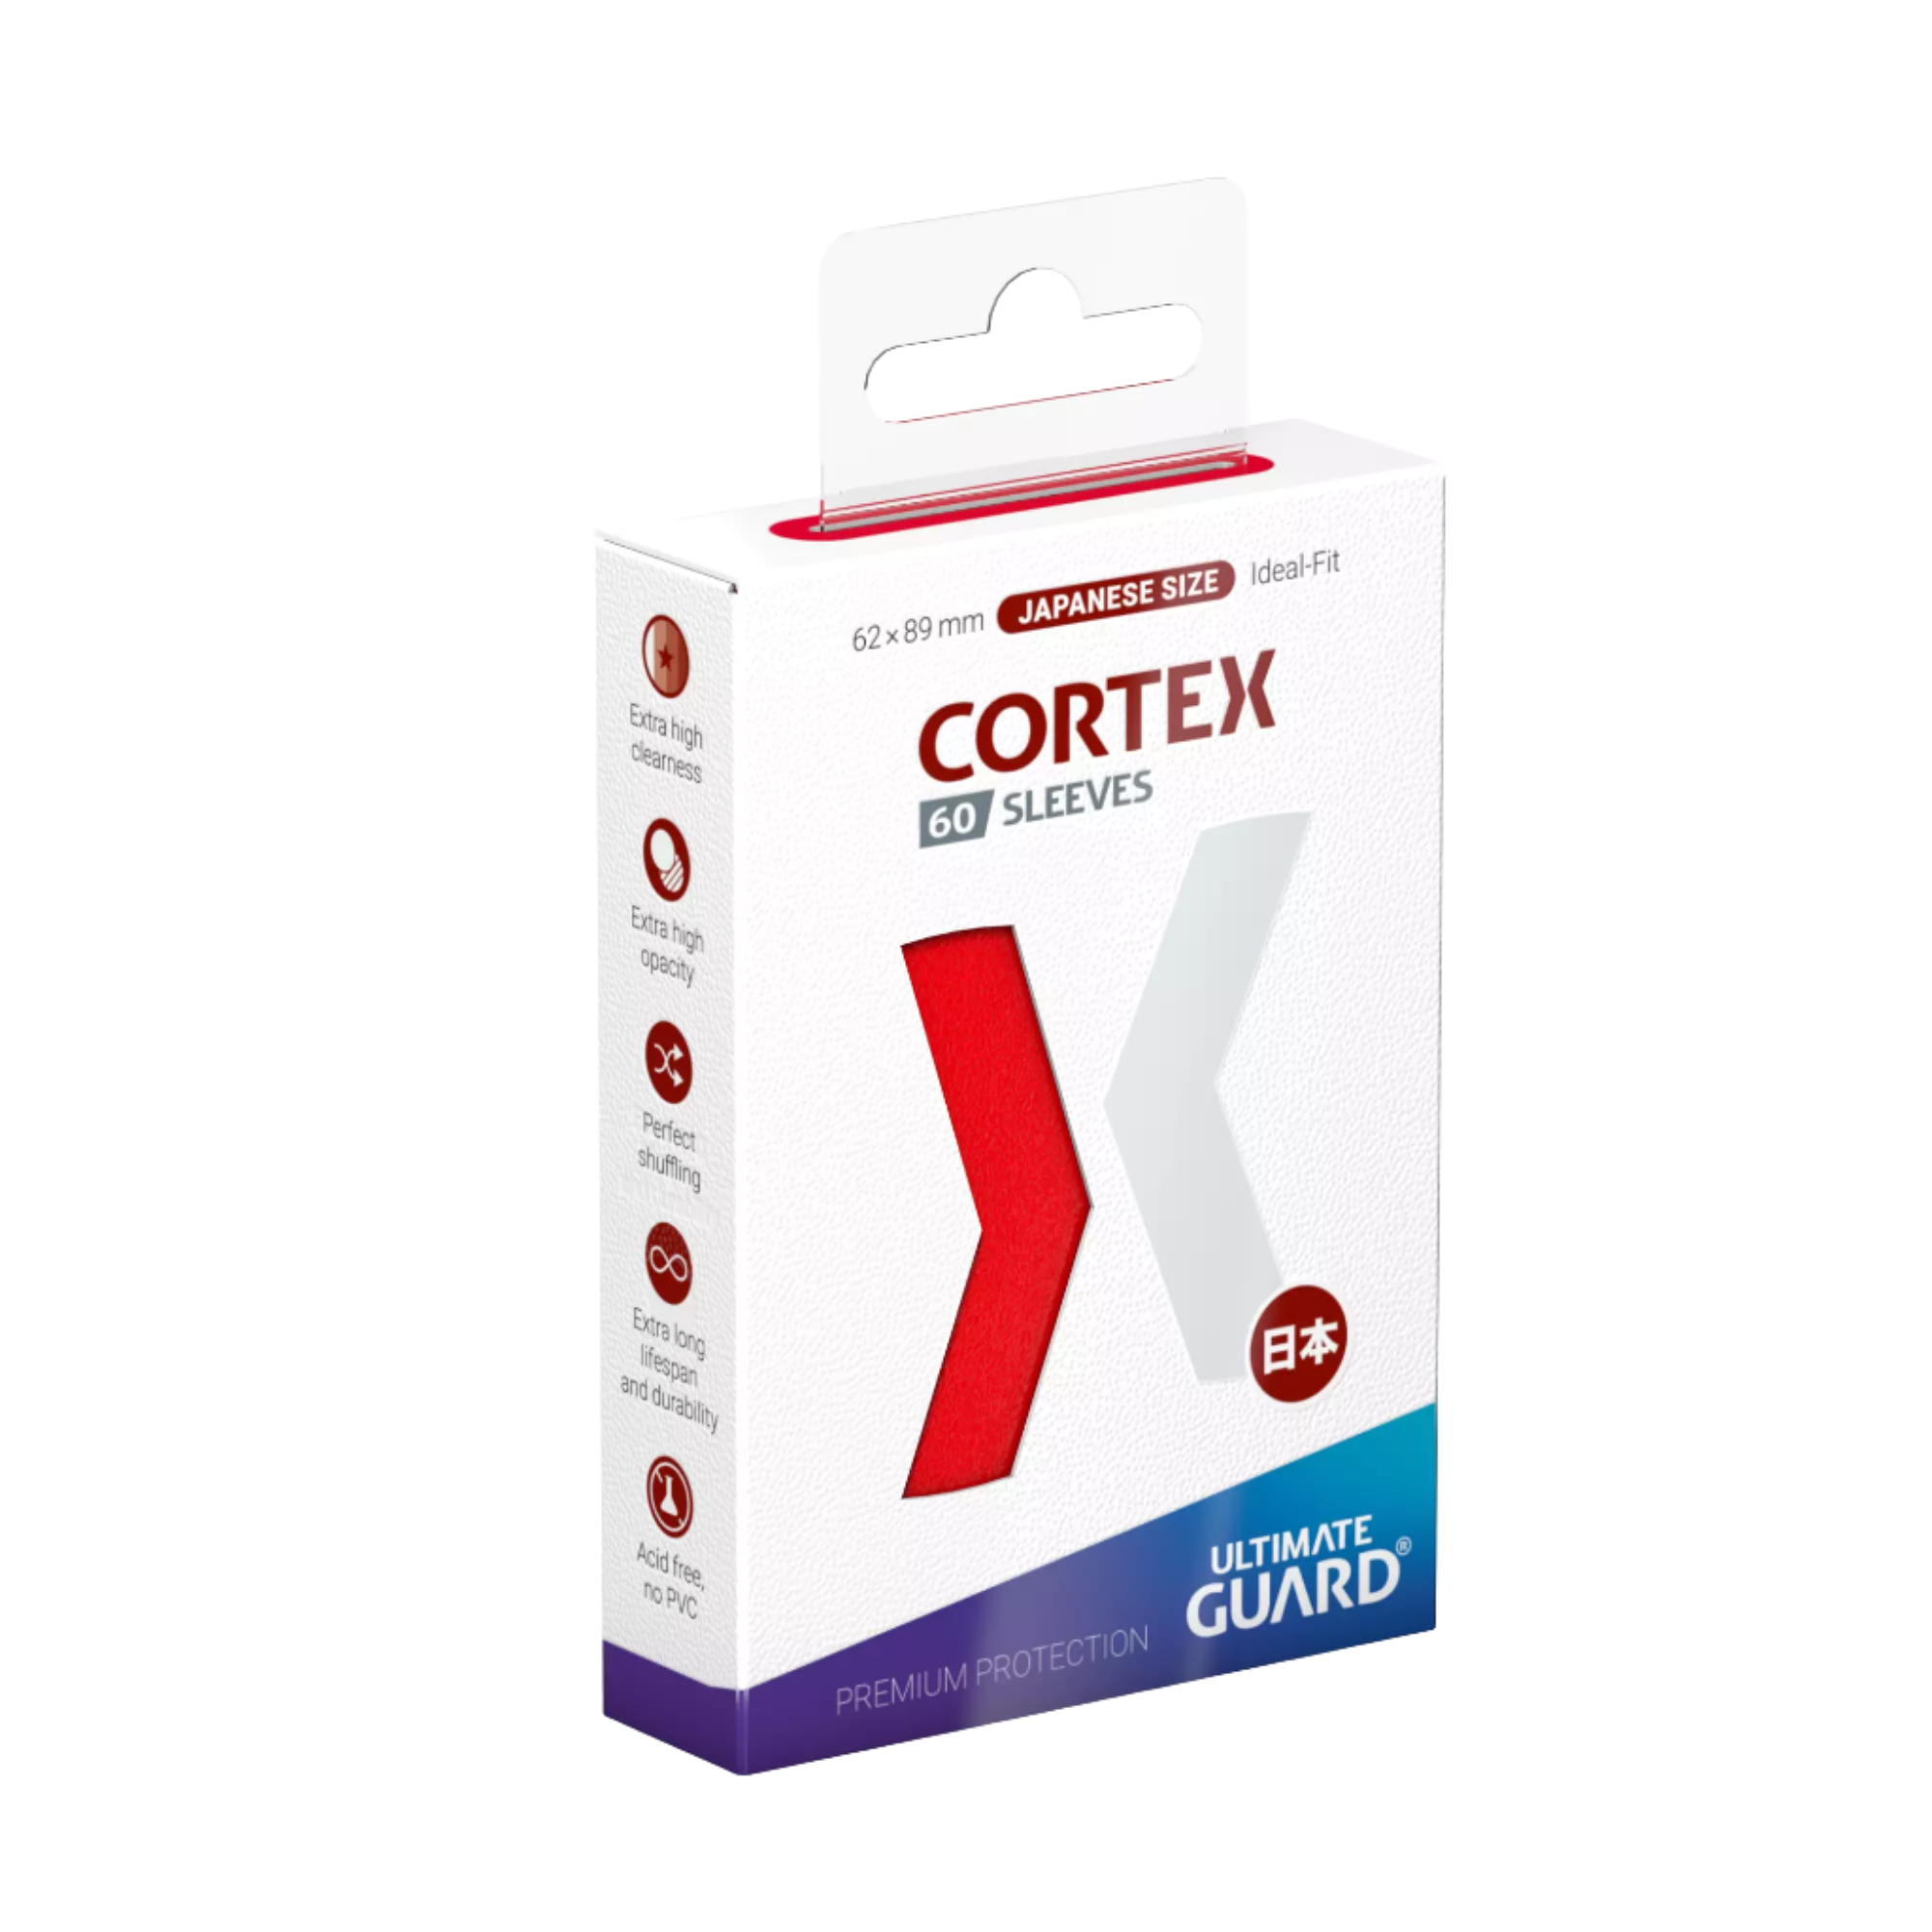 Ultimate Guard - Cortex Sleeves - Japanese Size - Ideal-Fit - Red - 60pk